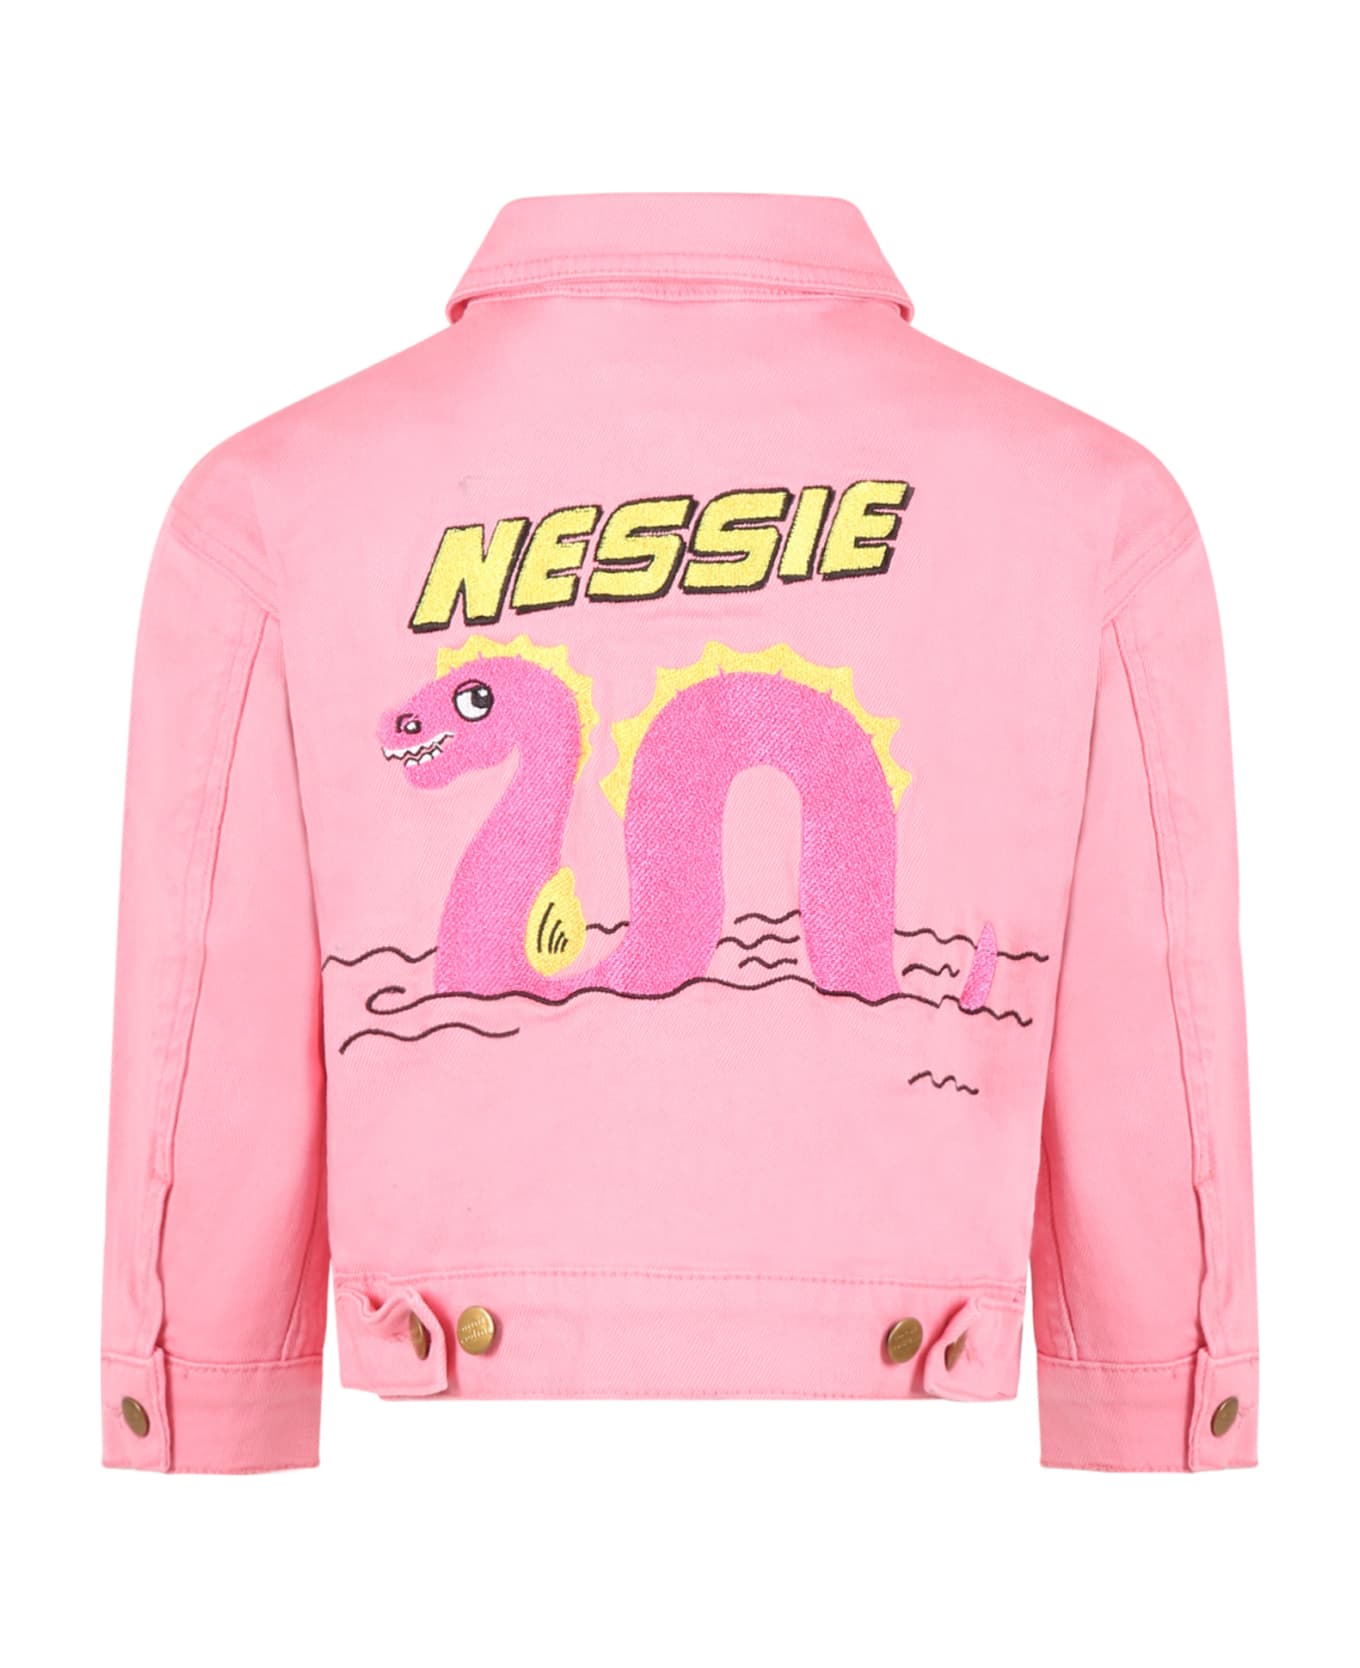 Mini Rodini Pink Jacket For Girl With Nessie - Pink